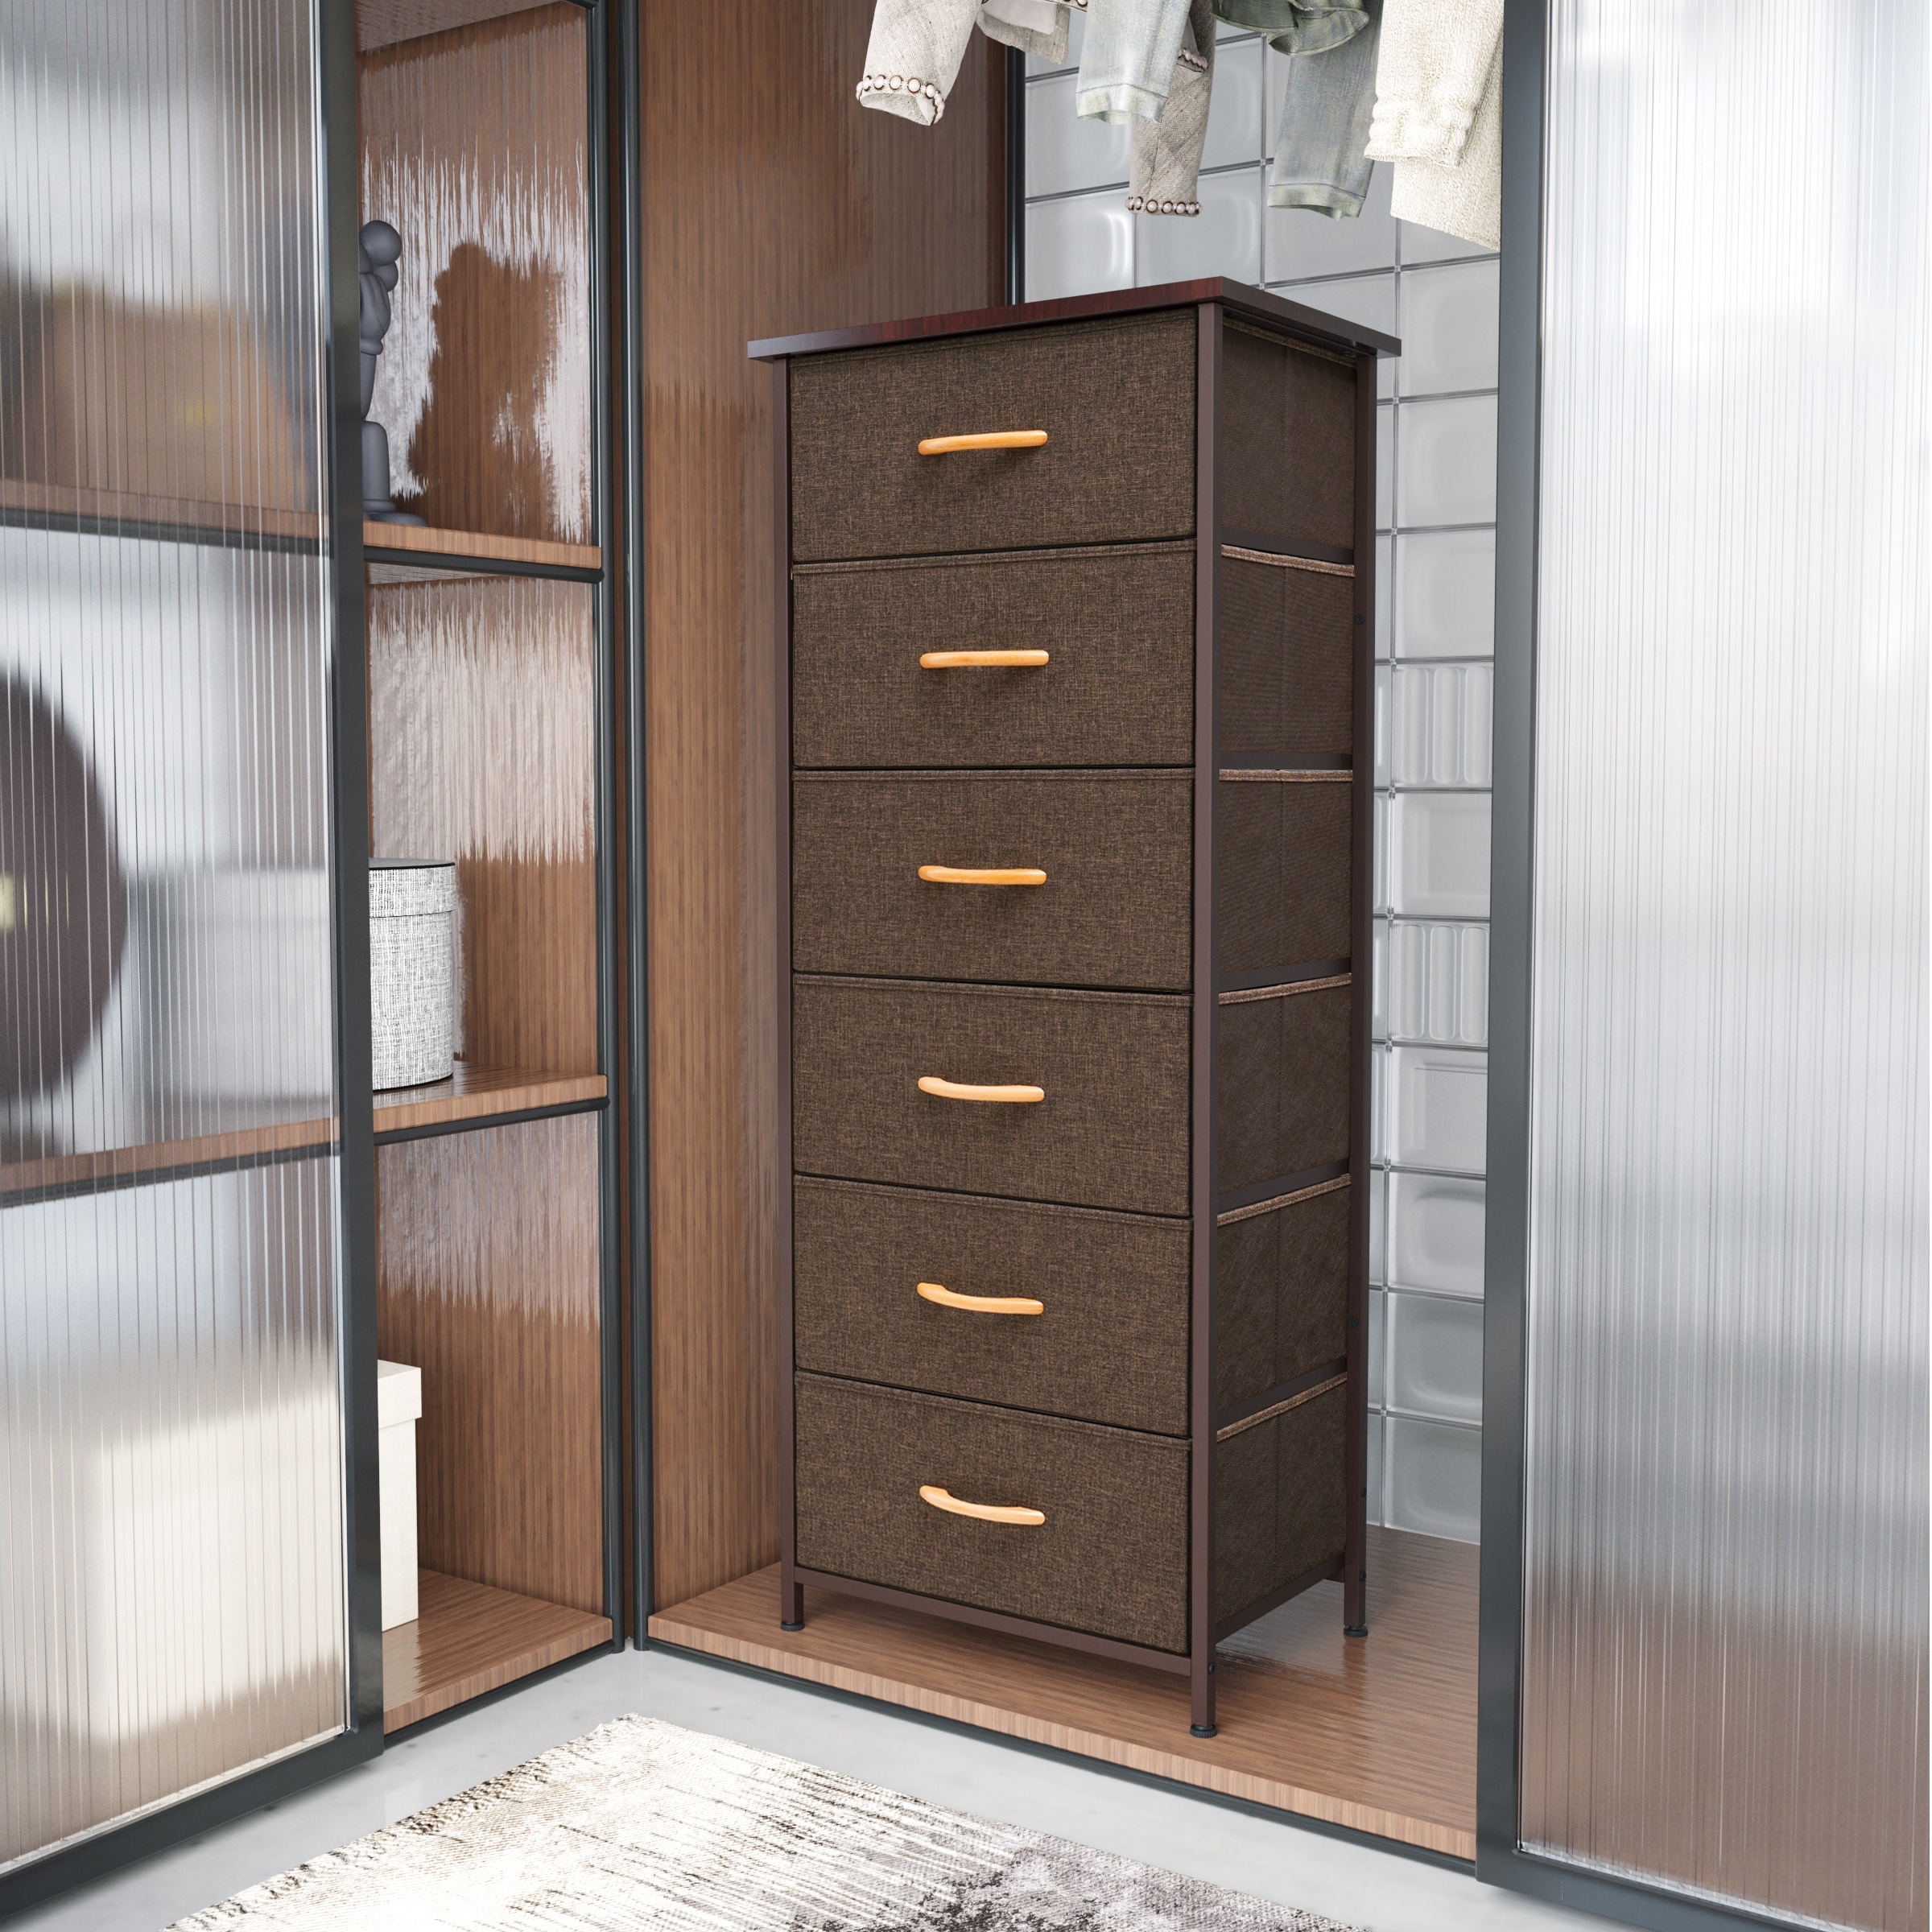 https://ak1.ostkcdn.com/images/products/is/images/direct/4c9ee324e455c08bfb6c814b02cbabbc25aa4724/VredHom-6-Drawers-Vertical-Dresser-Storage-Tower.jpg